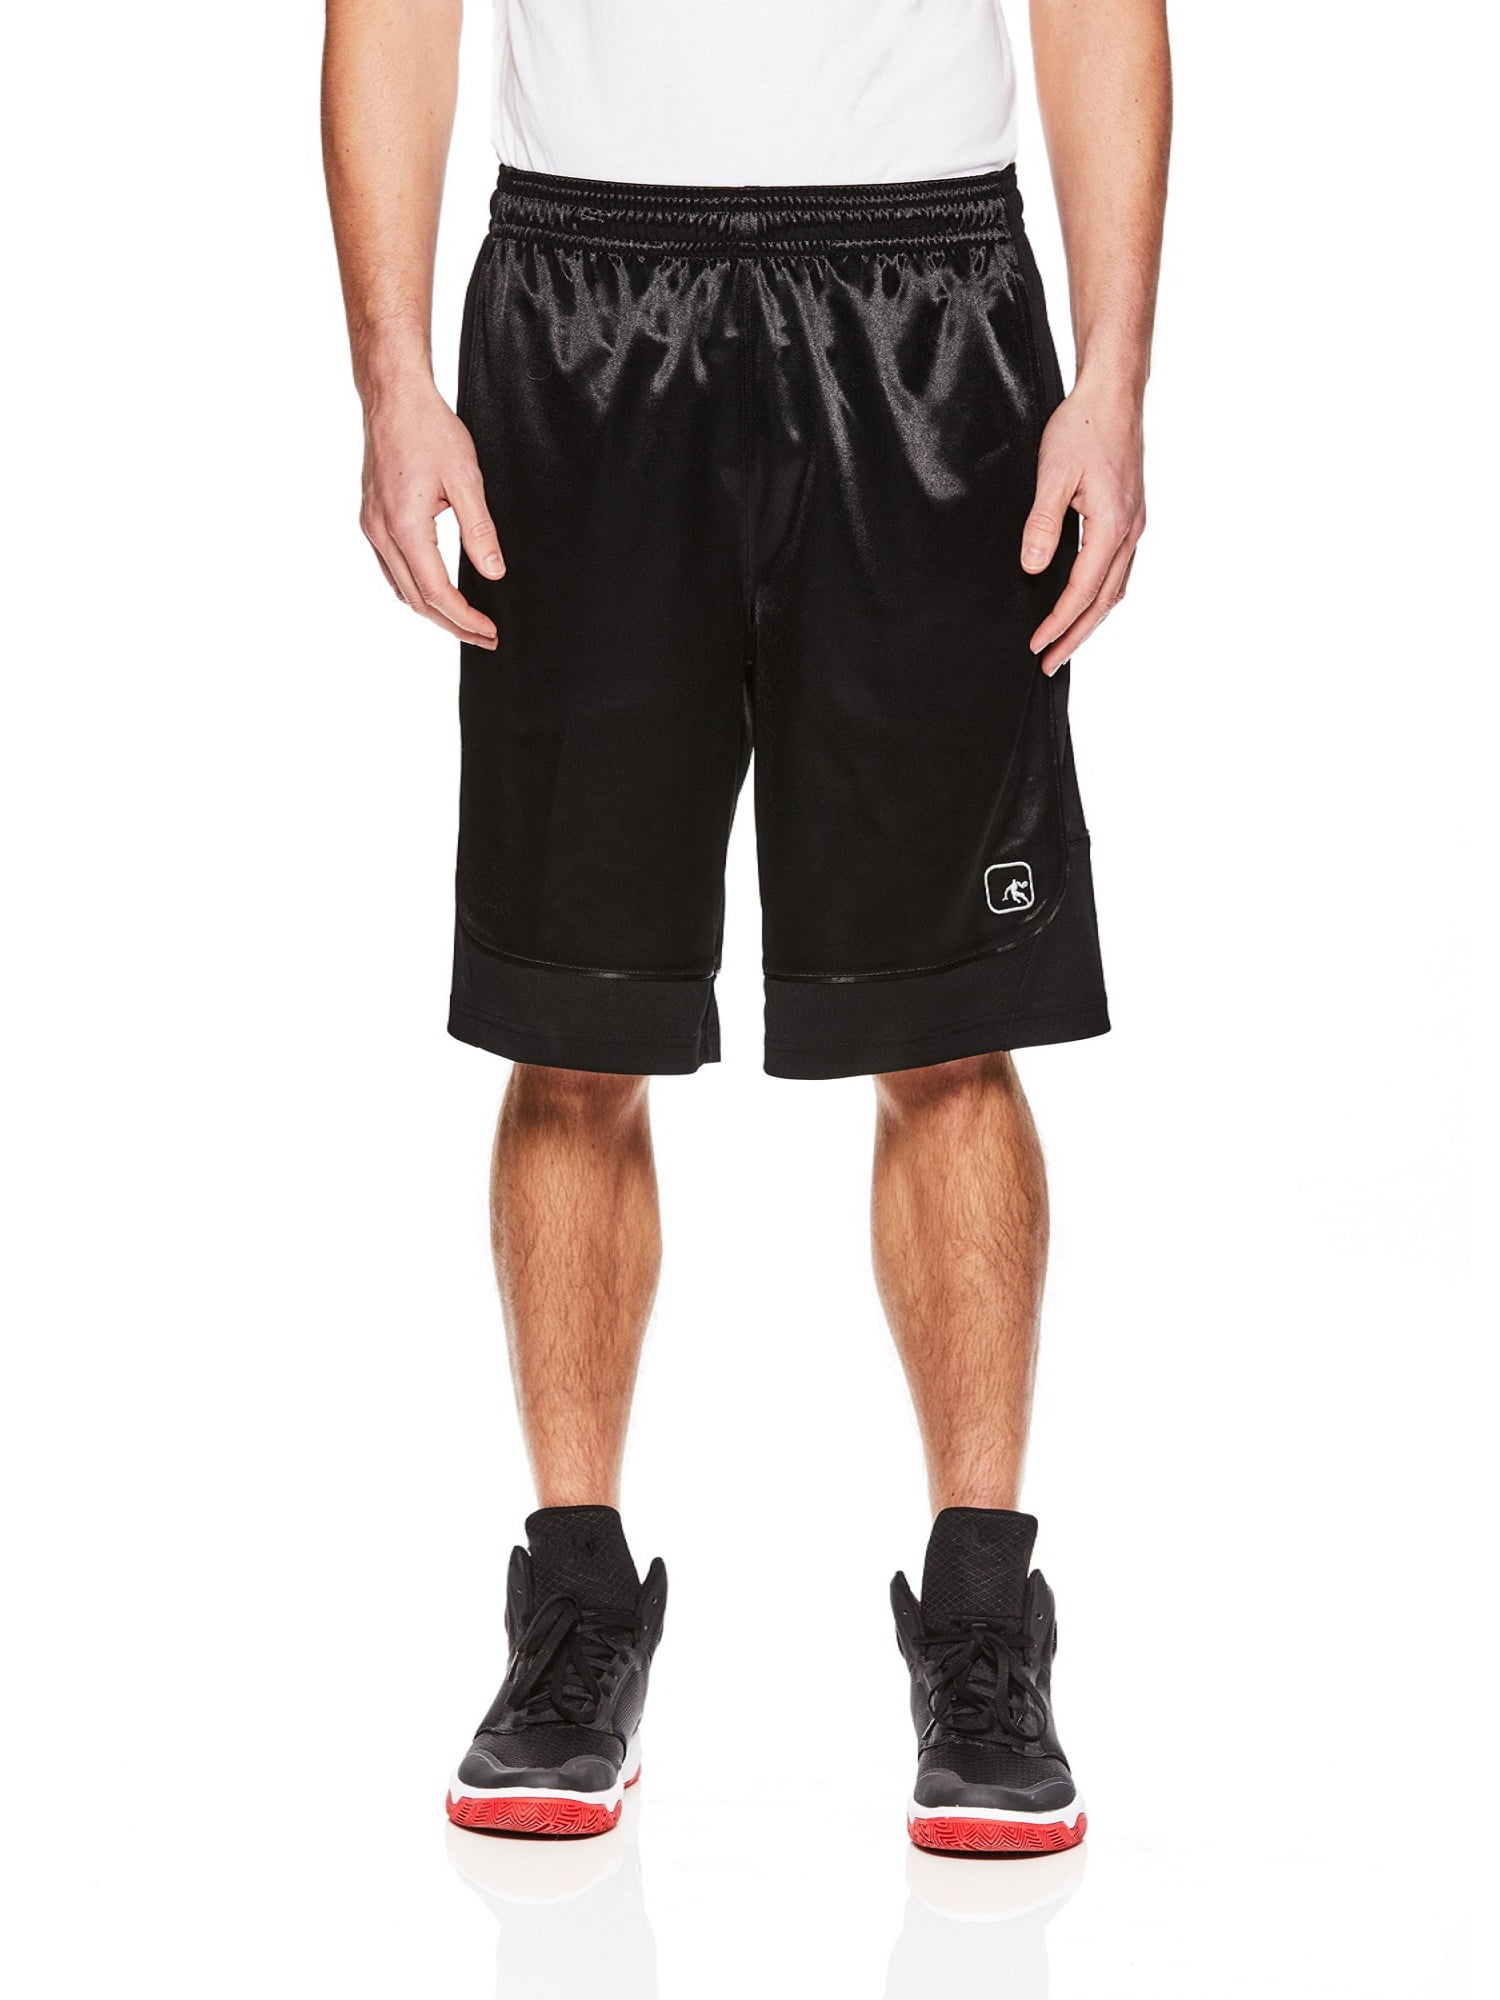 AND1 Men's All Courts Basketball Shorts - Walmart.com